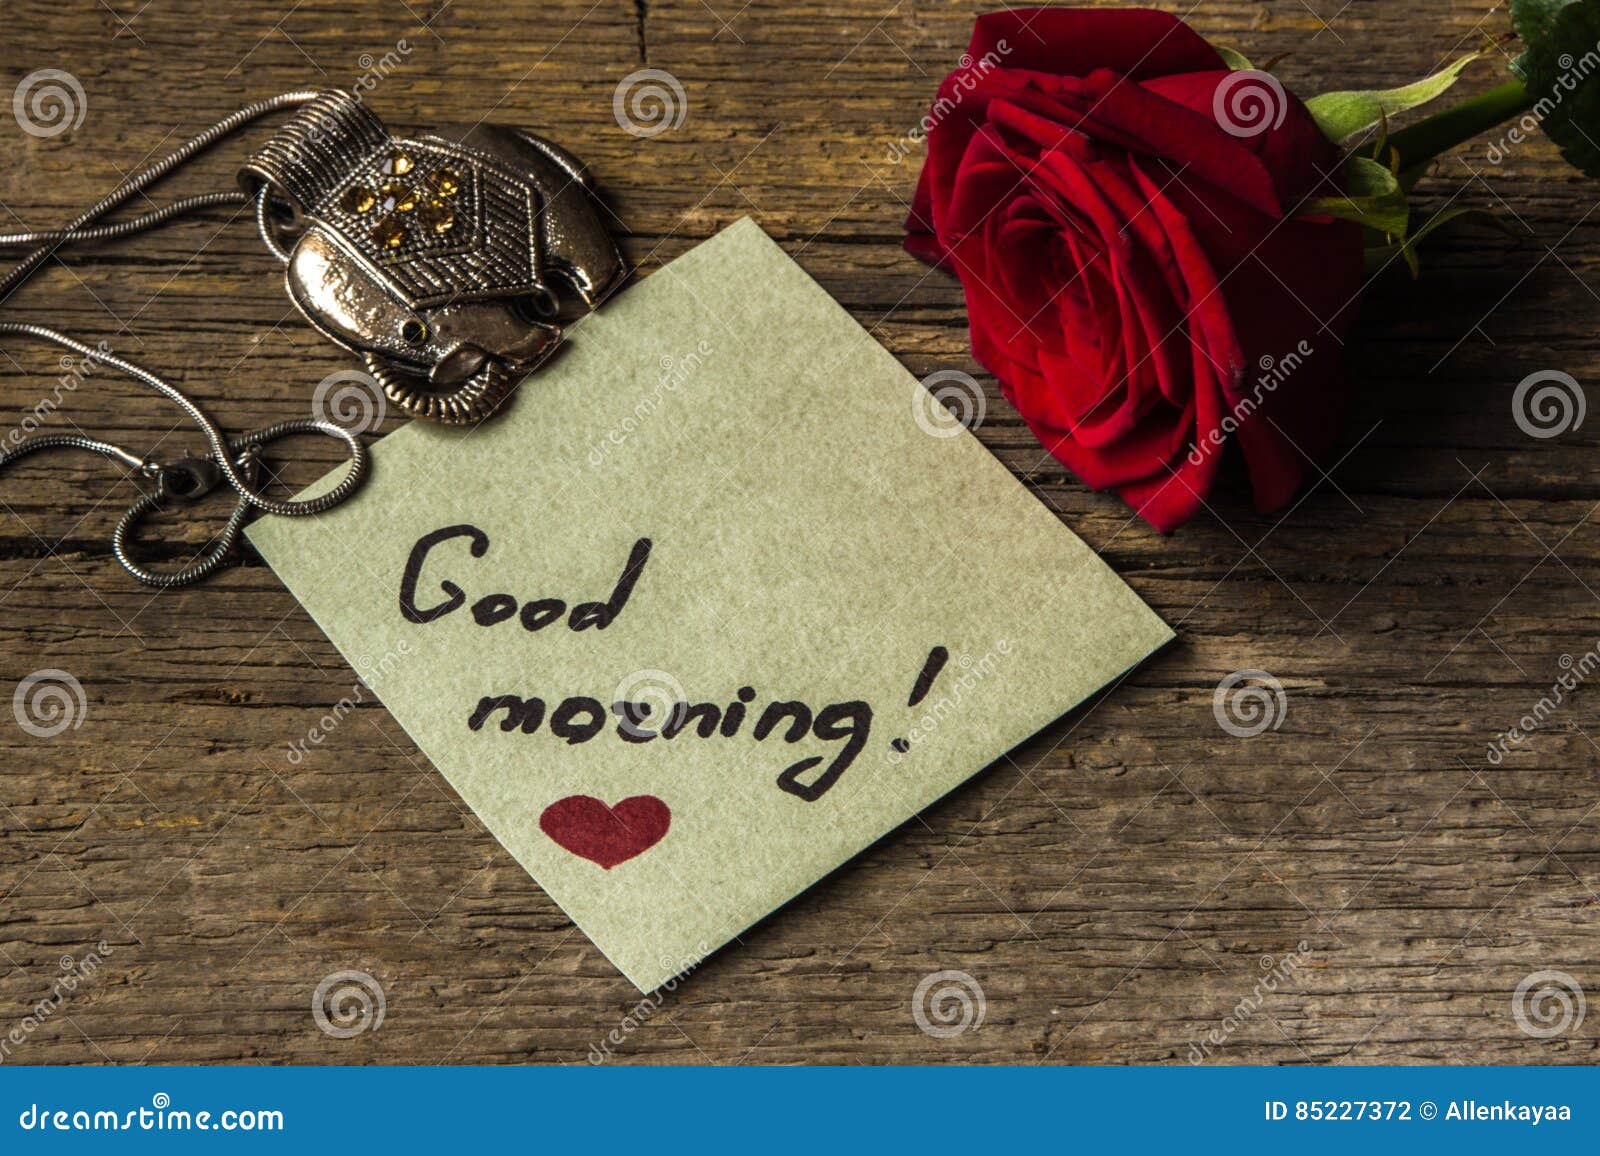 Good Morning Text on a Paper, Red Rose Flower and Decoration El ...